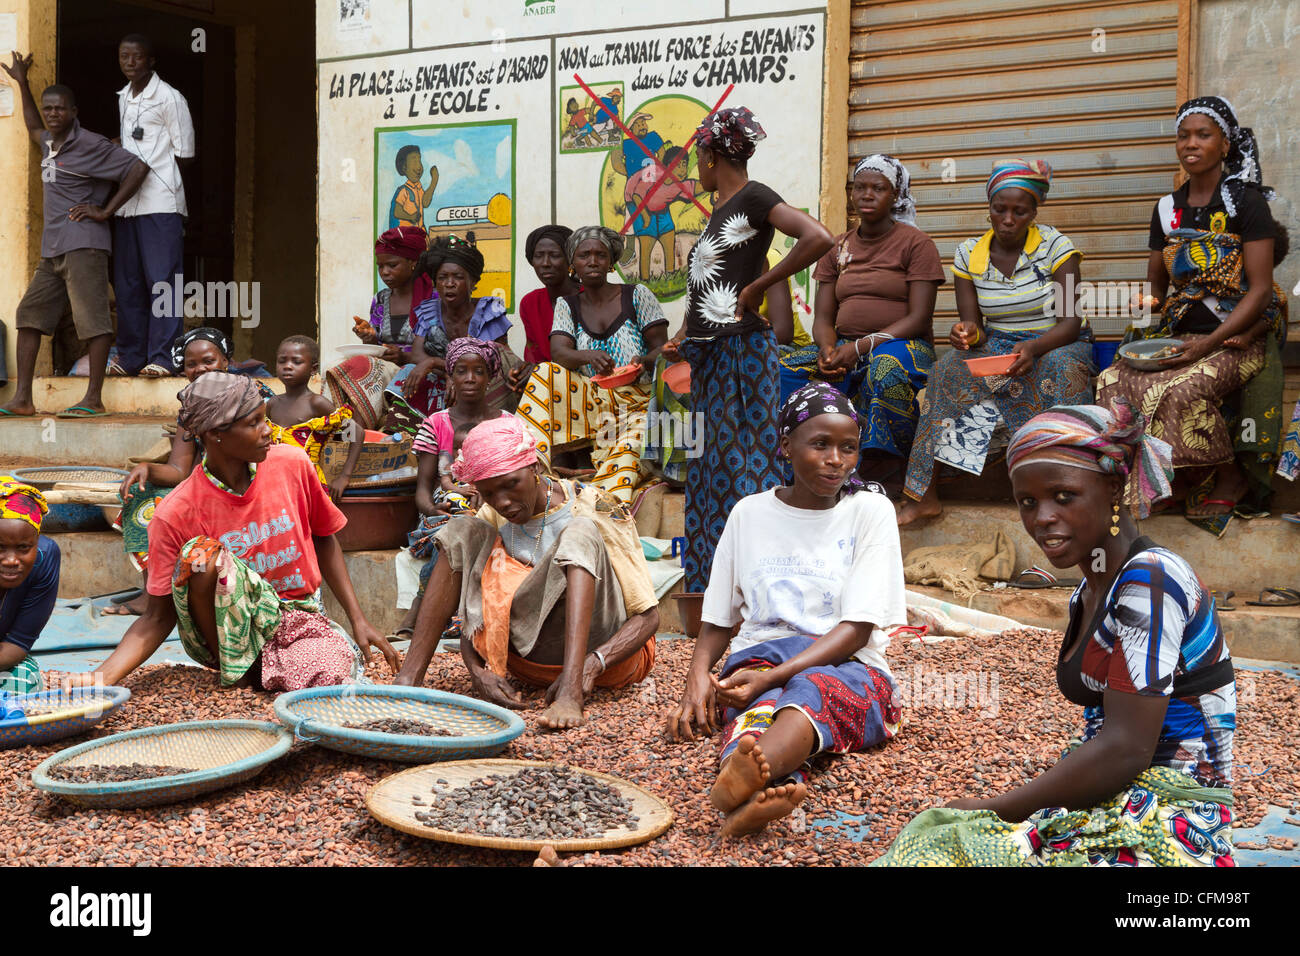 Women sorting  beans of cacao in front of a public notice against the child labor ,Duekoue, Ivory Coast ,Cote d'Ivoire Stock Photo